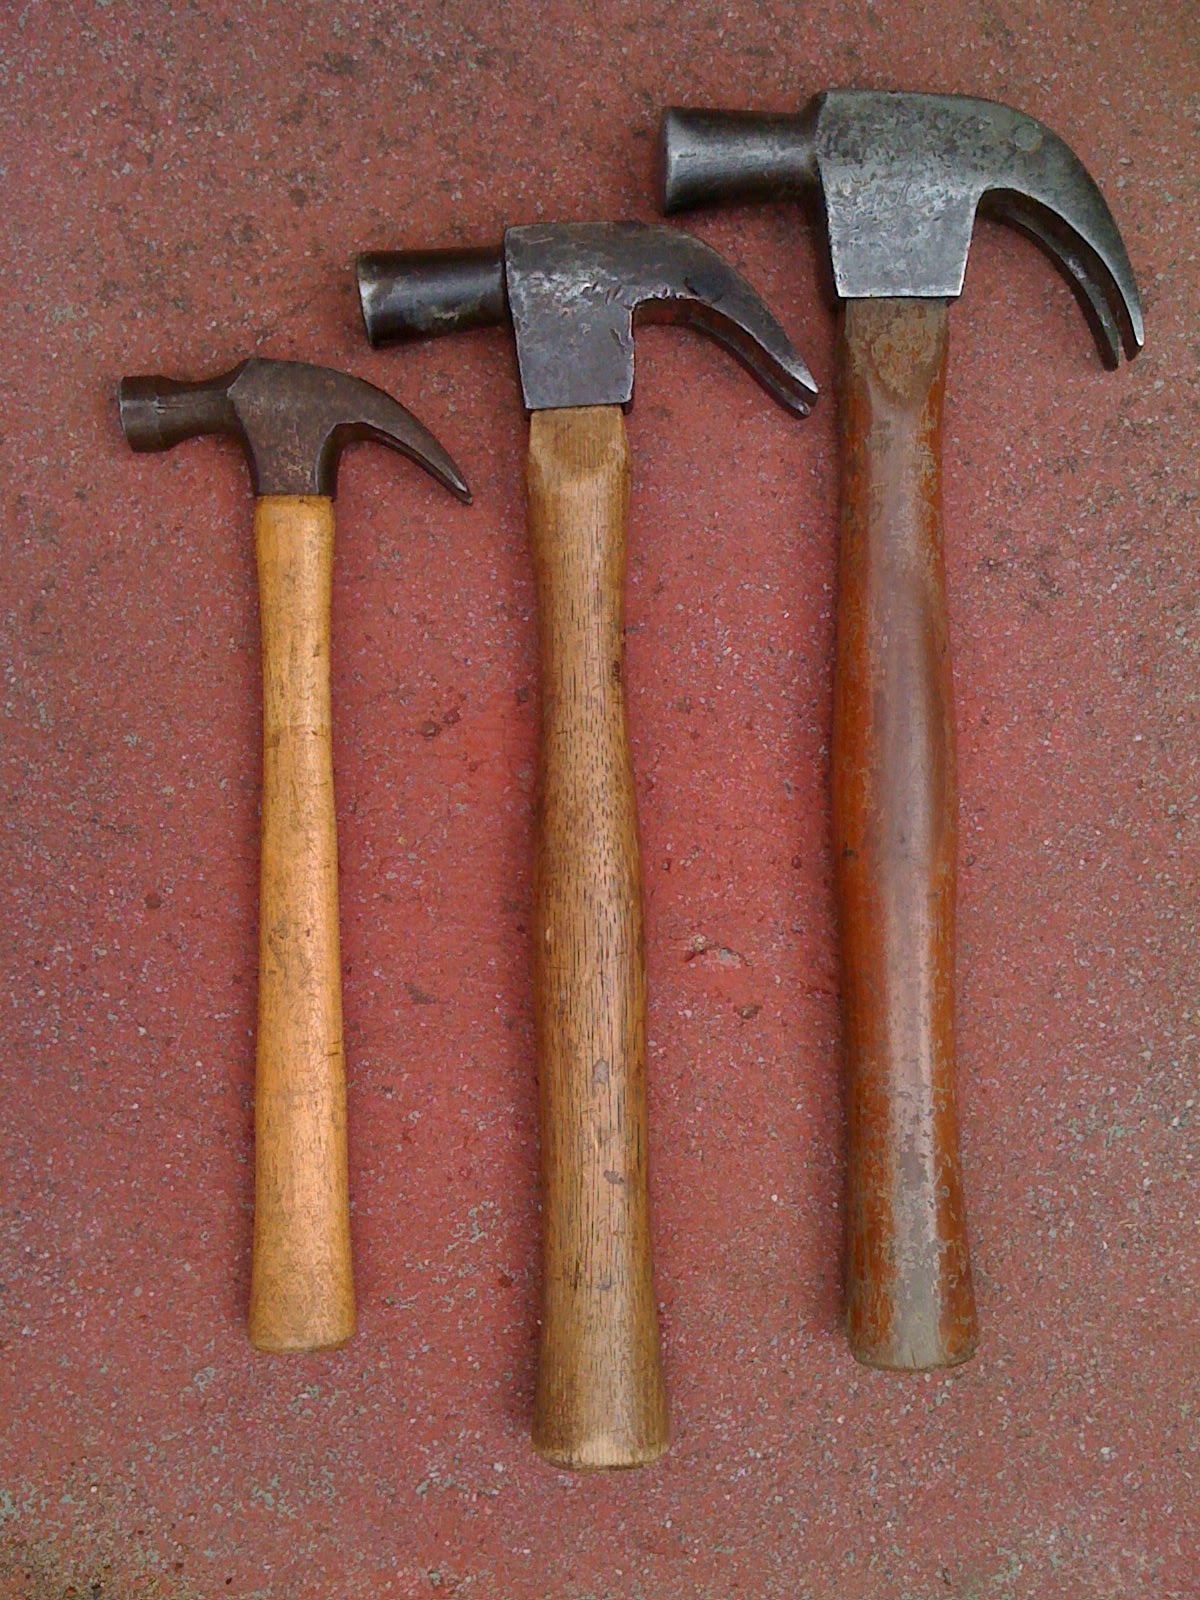 The Joy of Wood for Kids.: Which hammer is best to use?